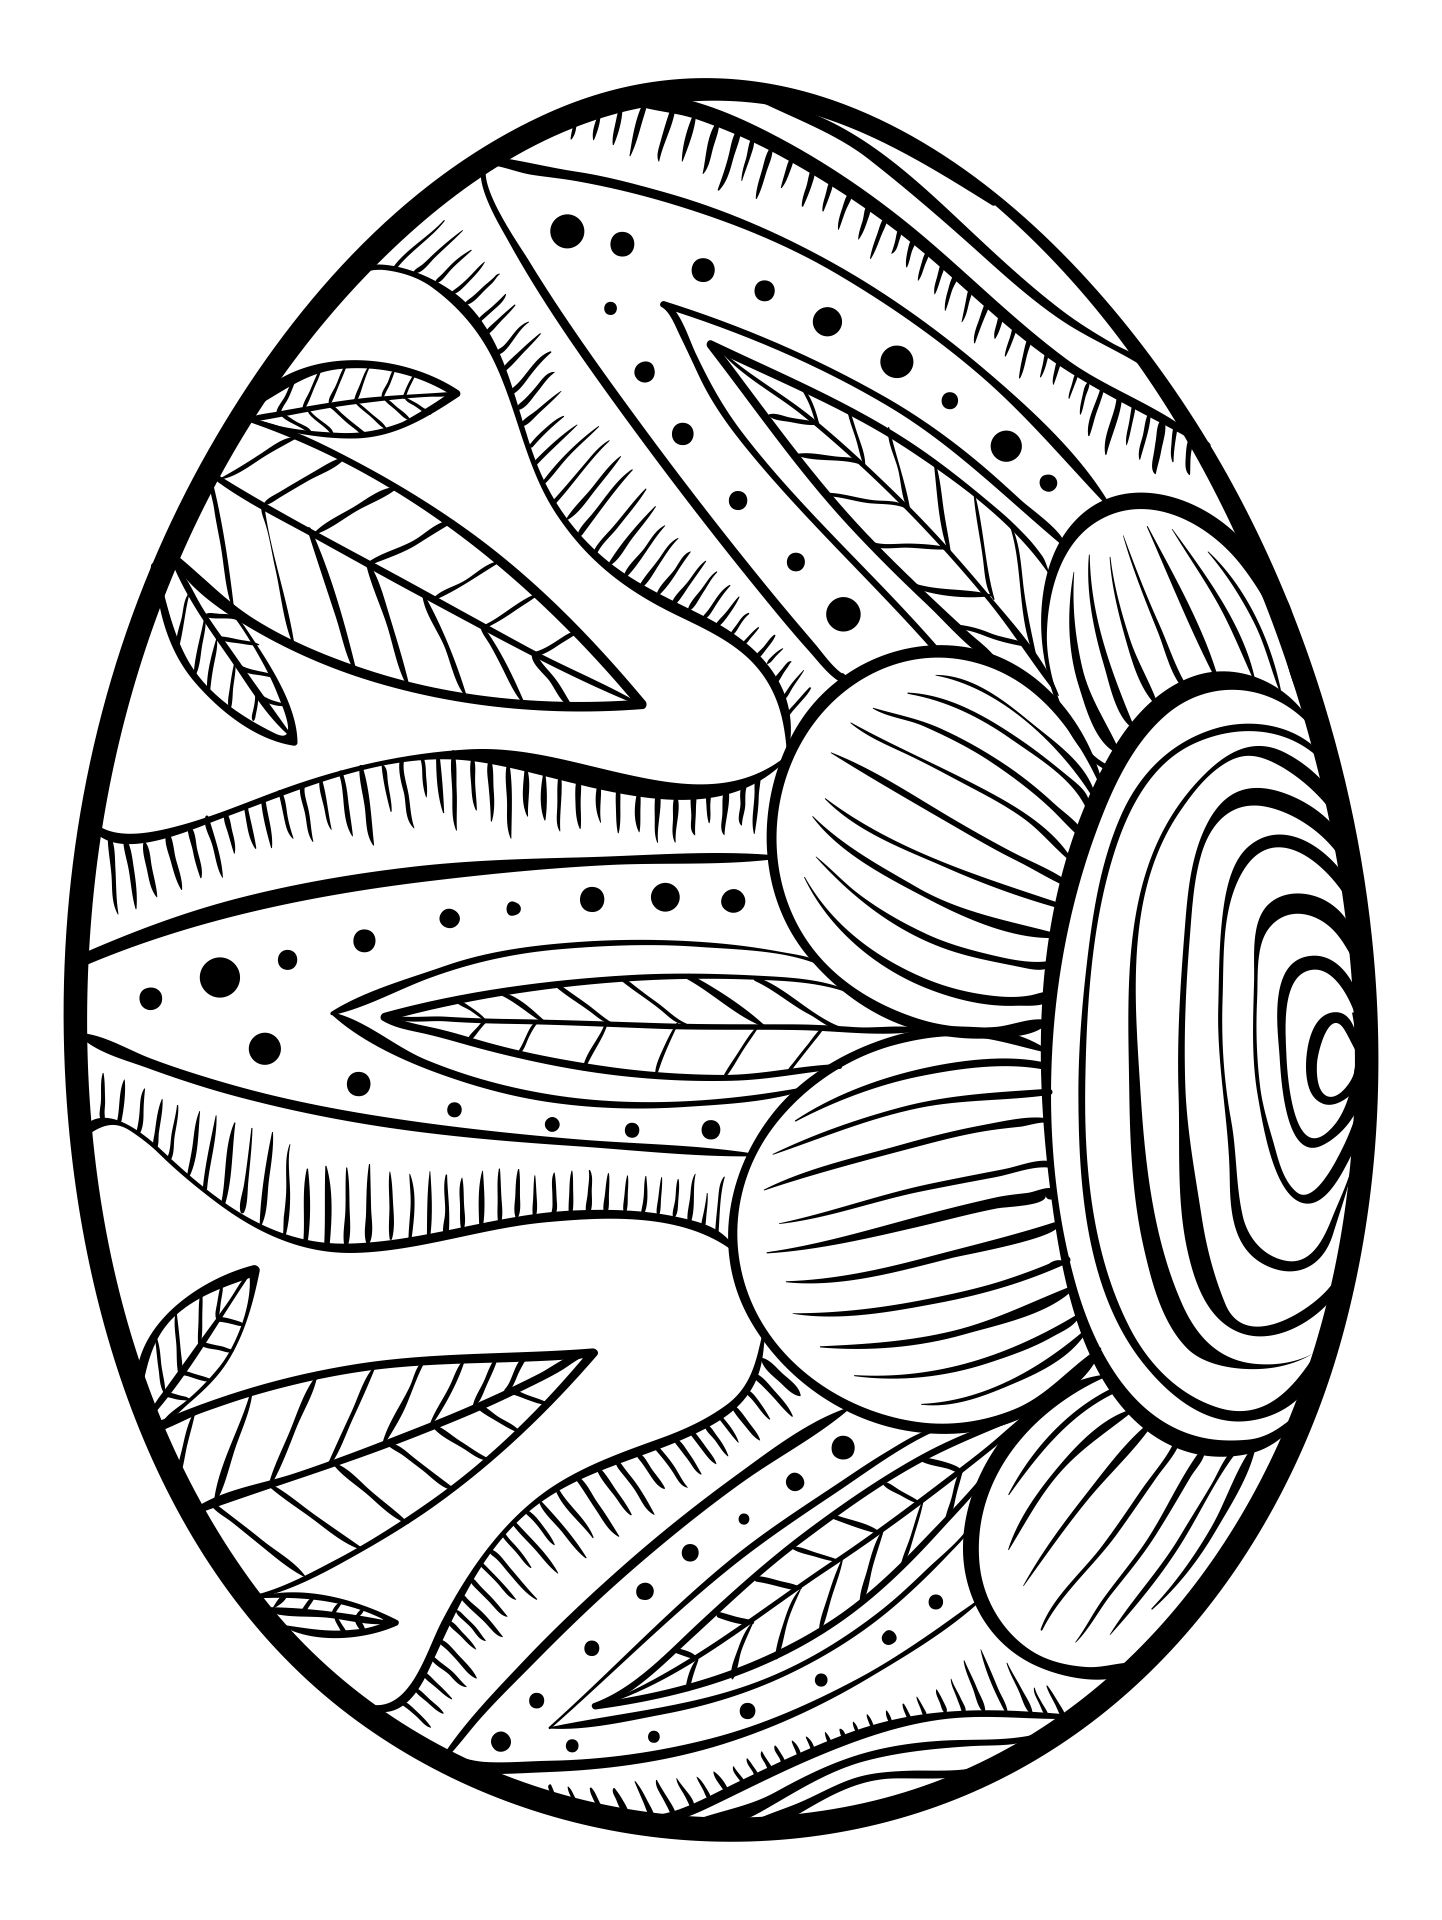 Printable Unique Spring & Easter Holiday Adult Coloring Pages Designs